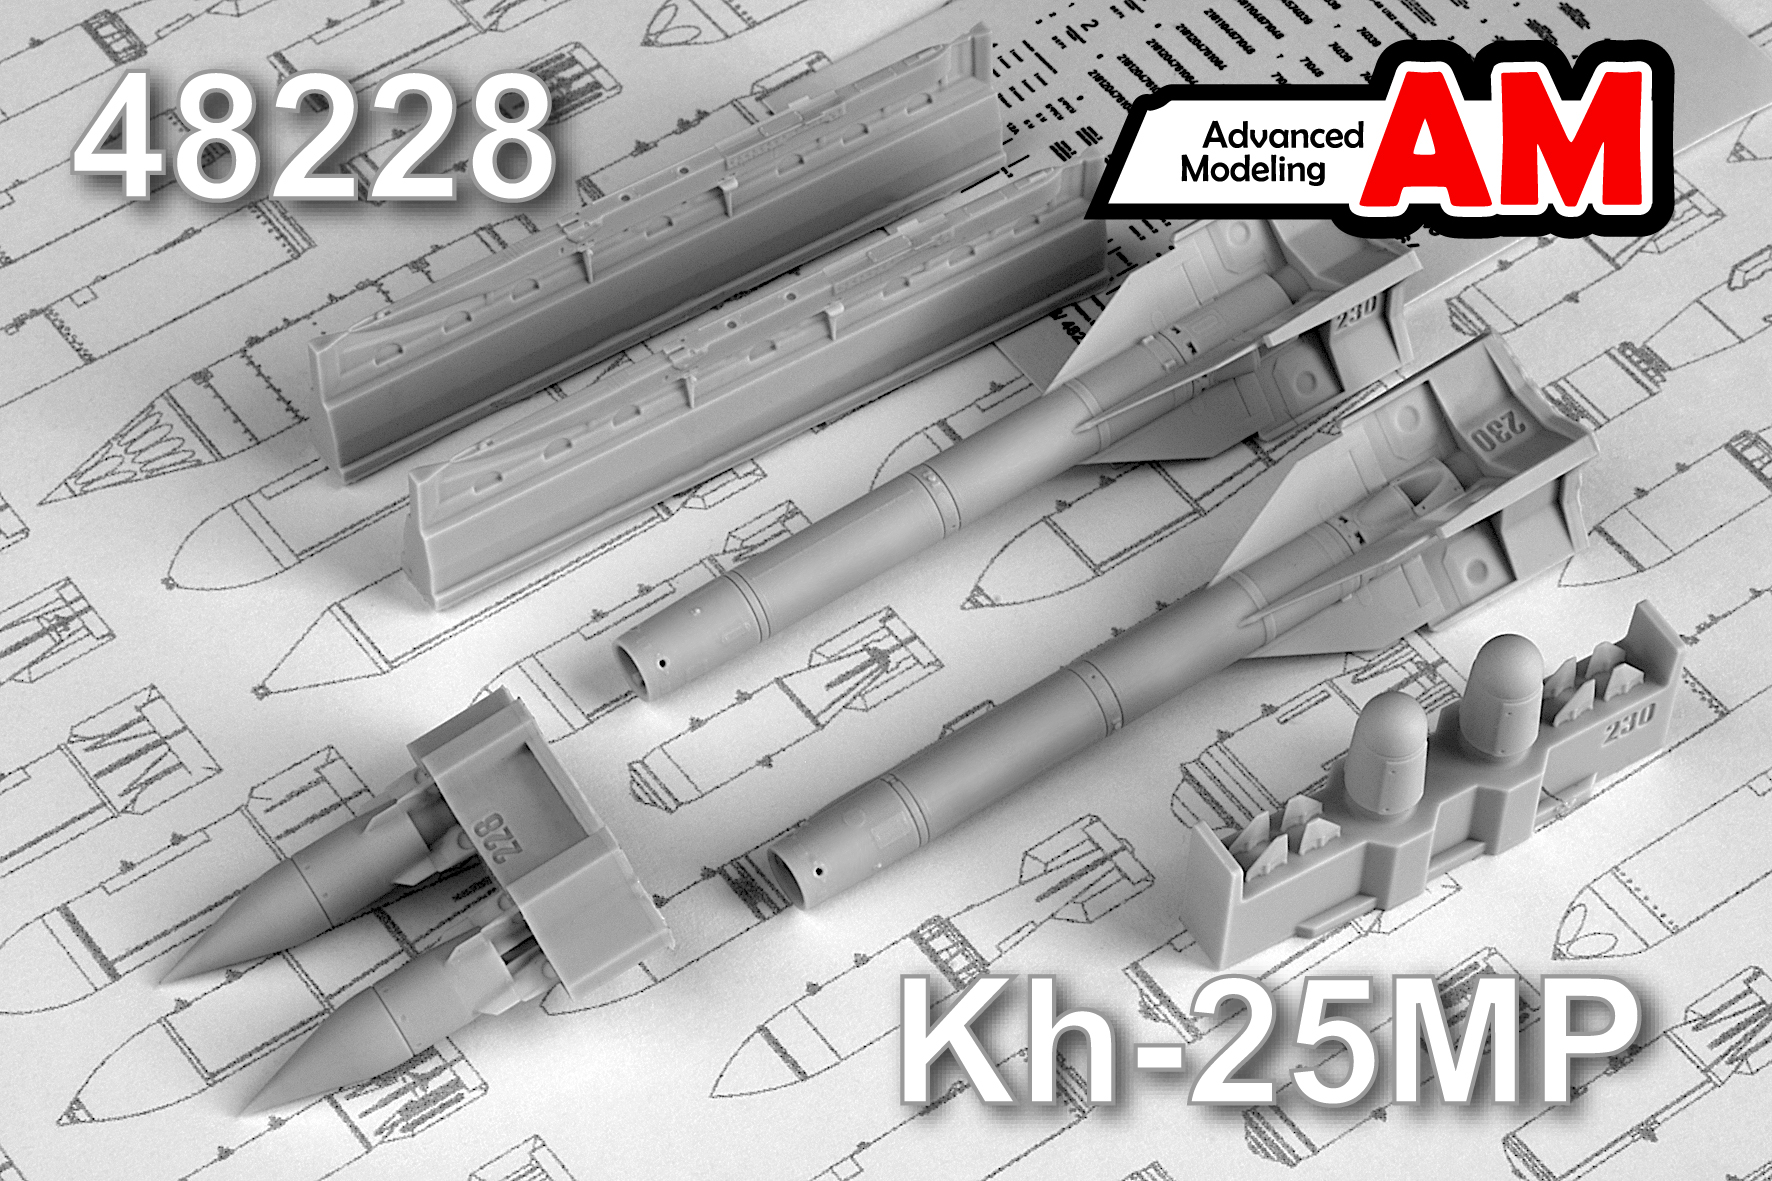 Additions (3D resin printing) 1/48 Aircraft guided missile Kh-25MP1 with launcher APU-68UM2 (Advanced Modeling) 